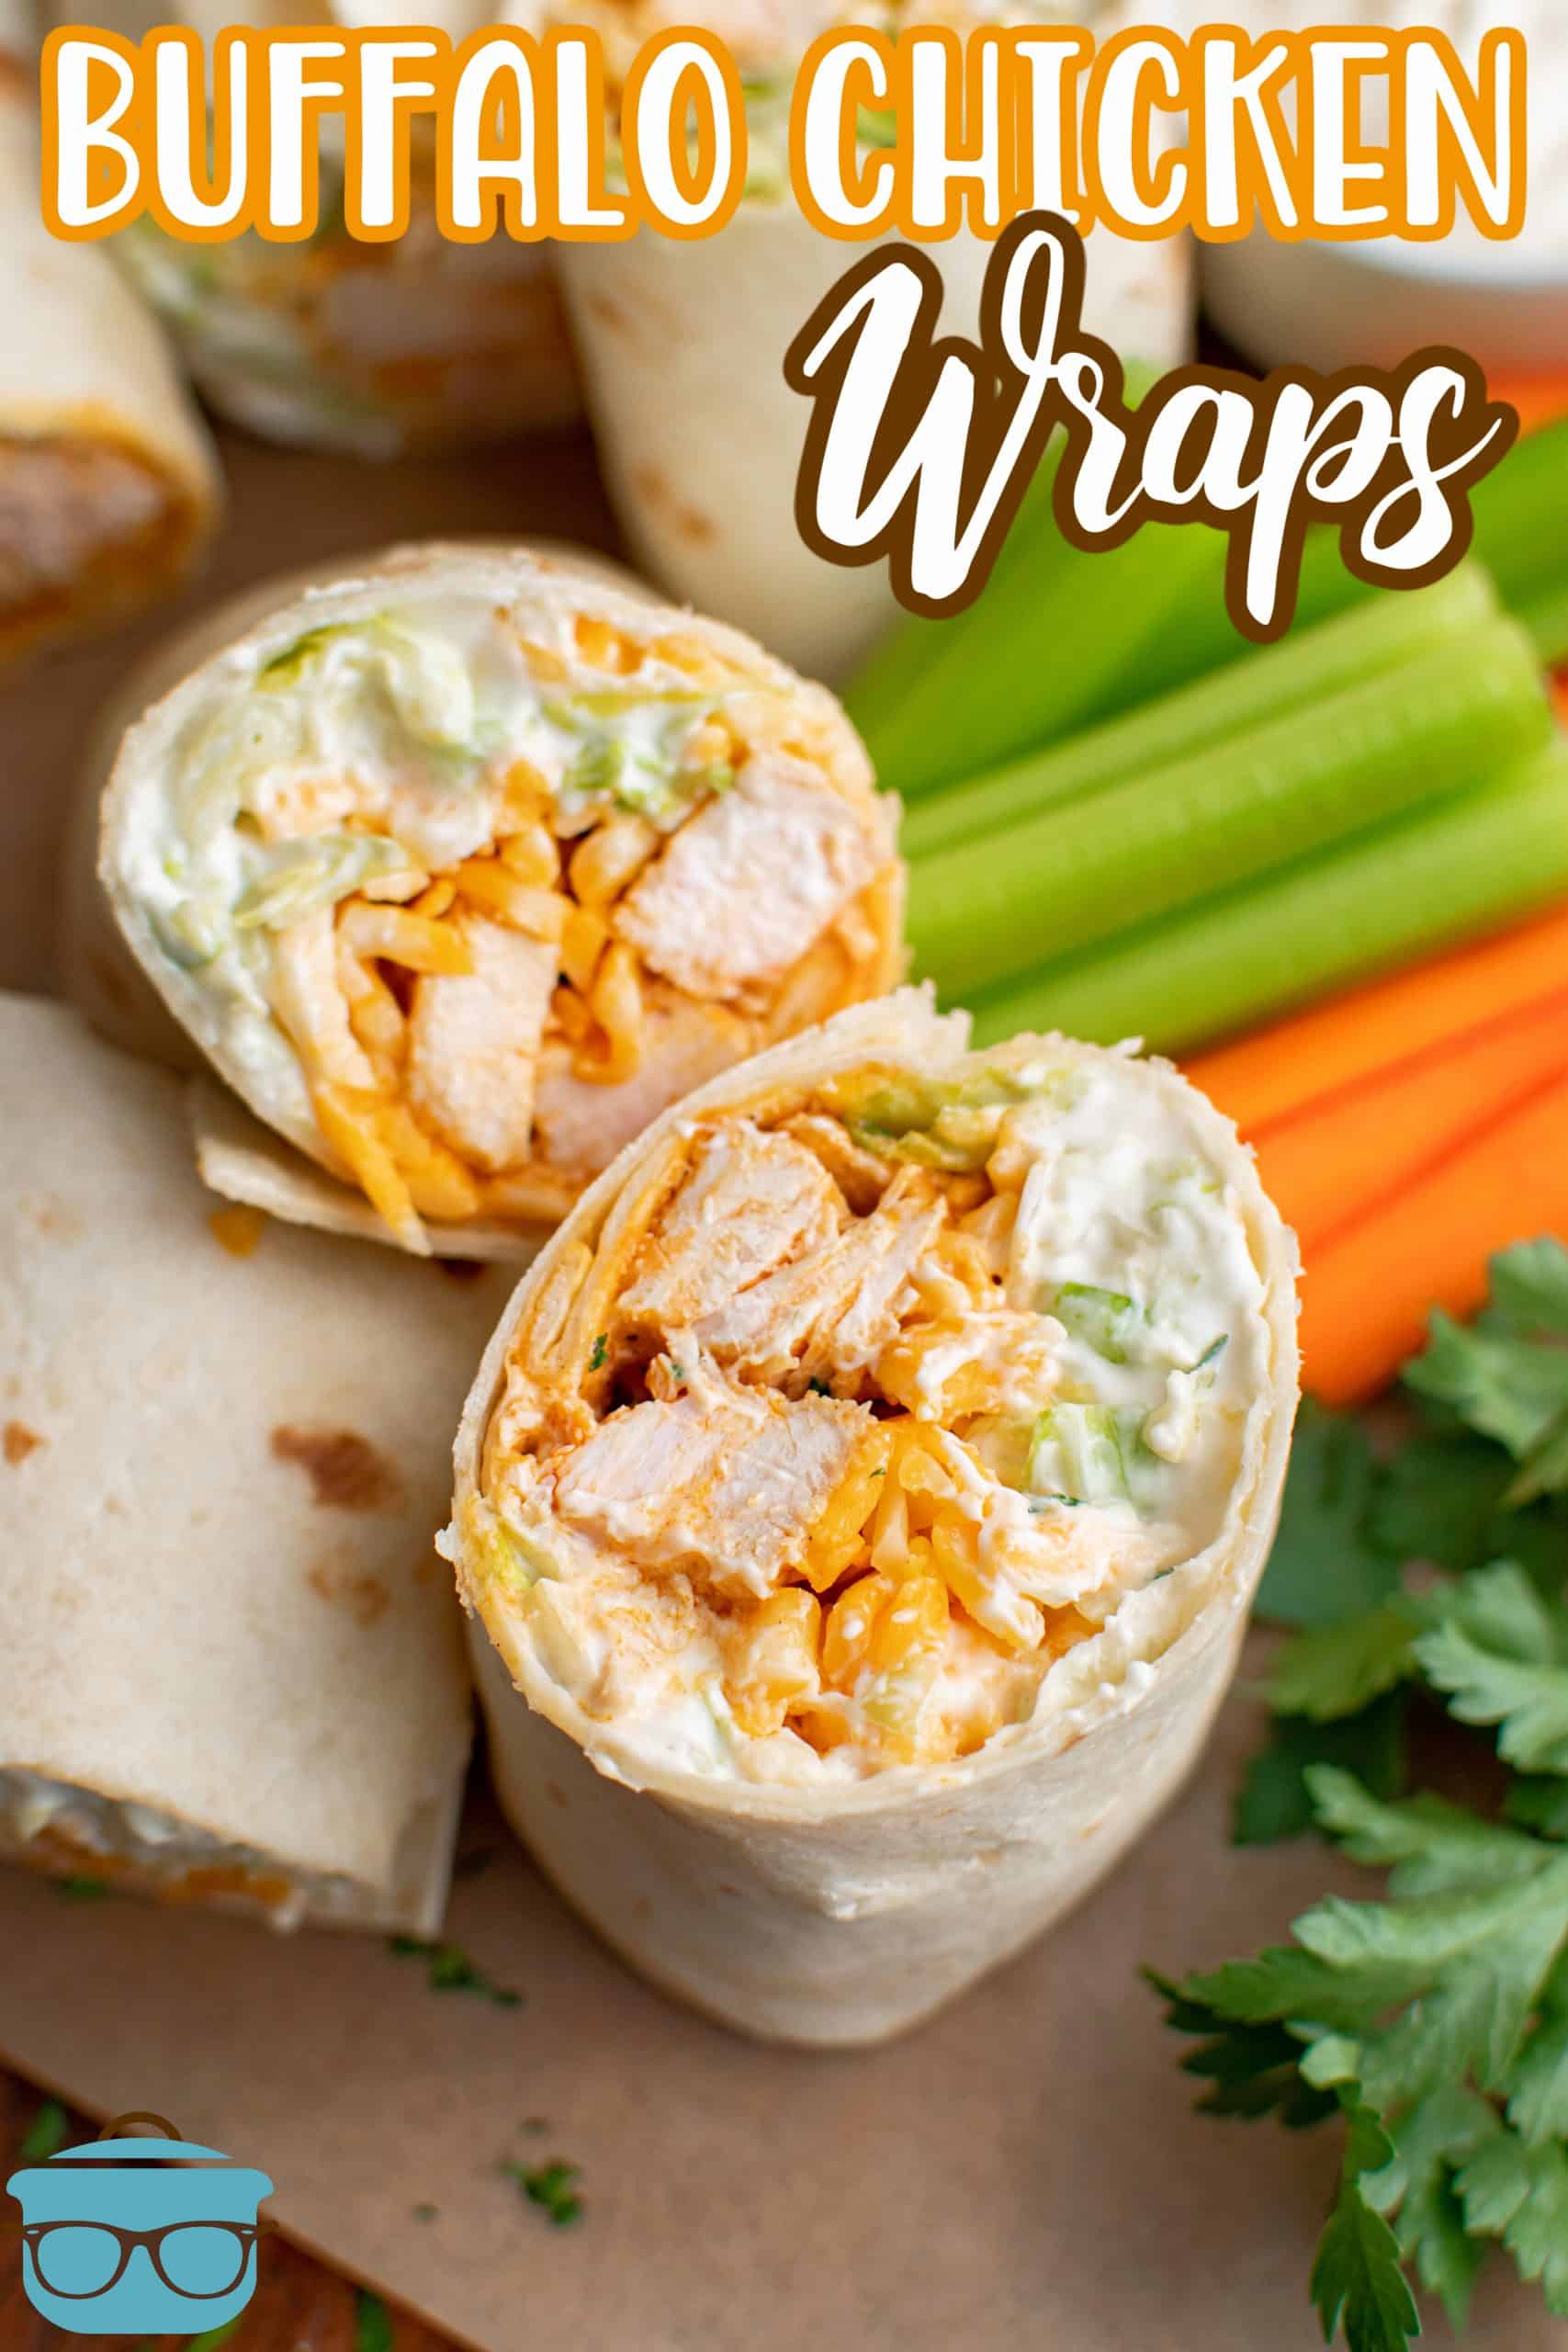 One cut open Buffalo Chicken wrap next to carrots and celery.